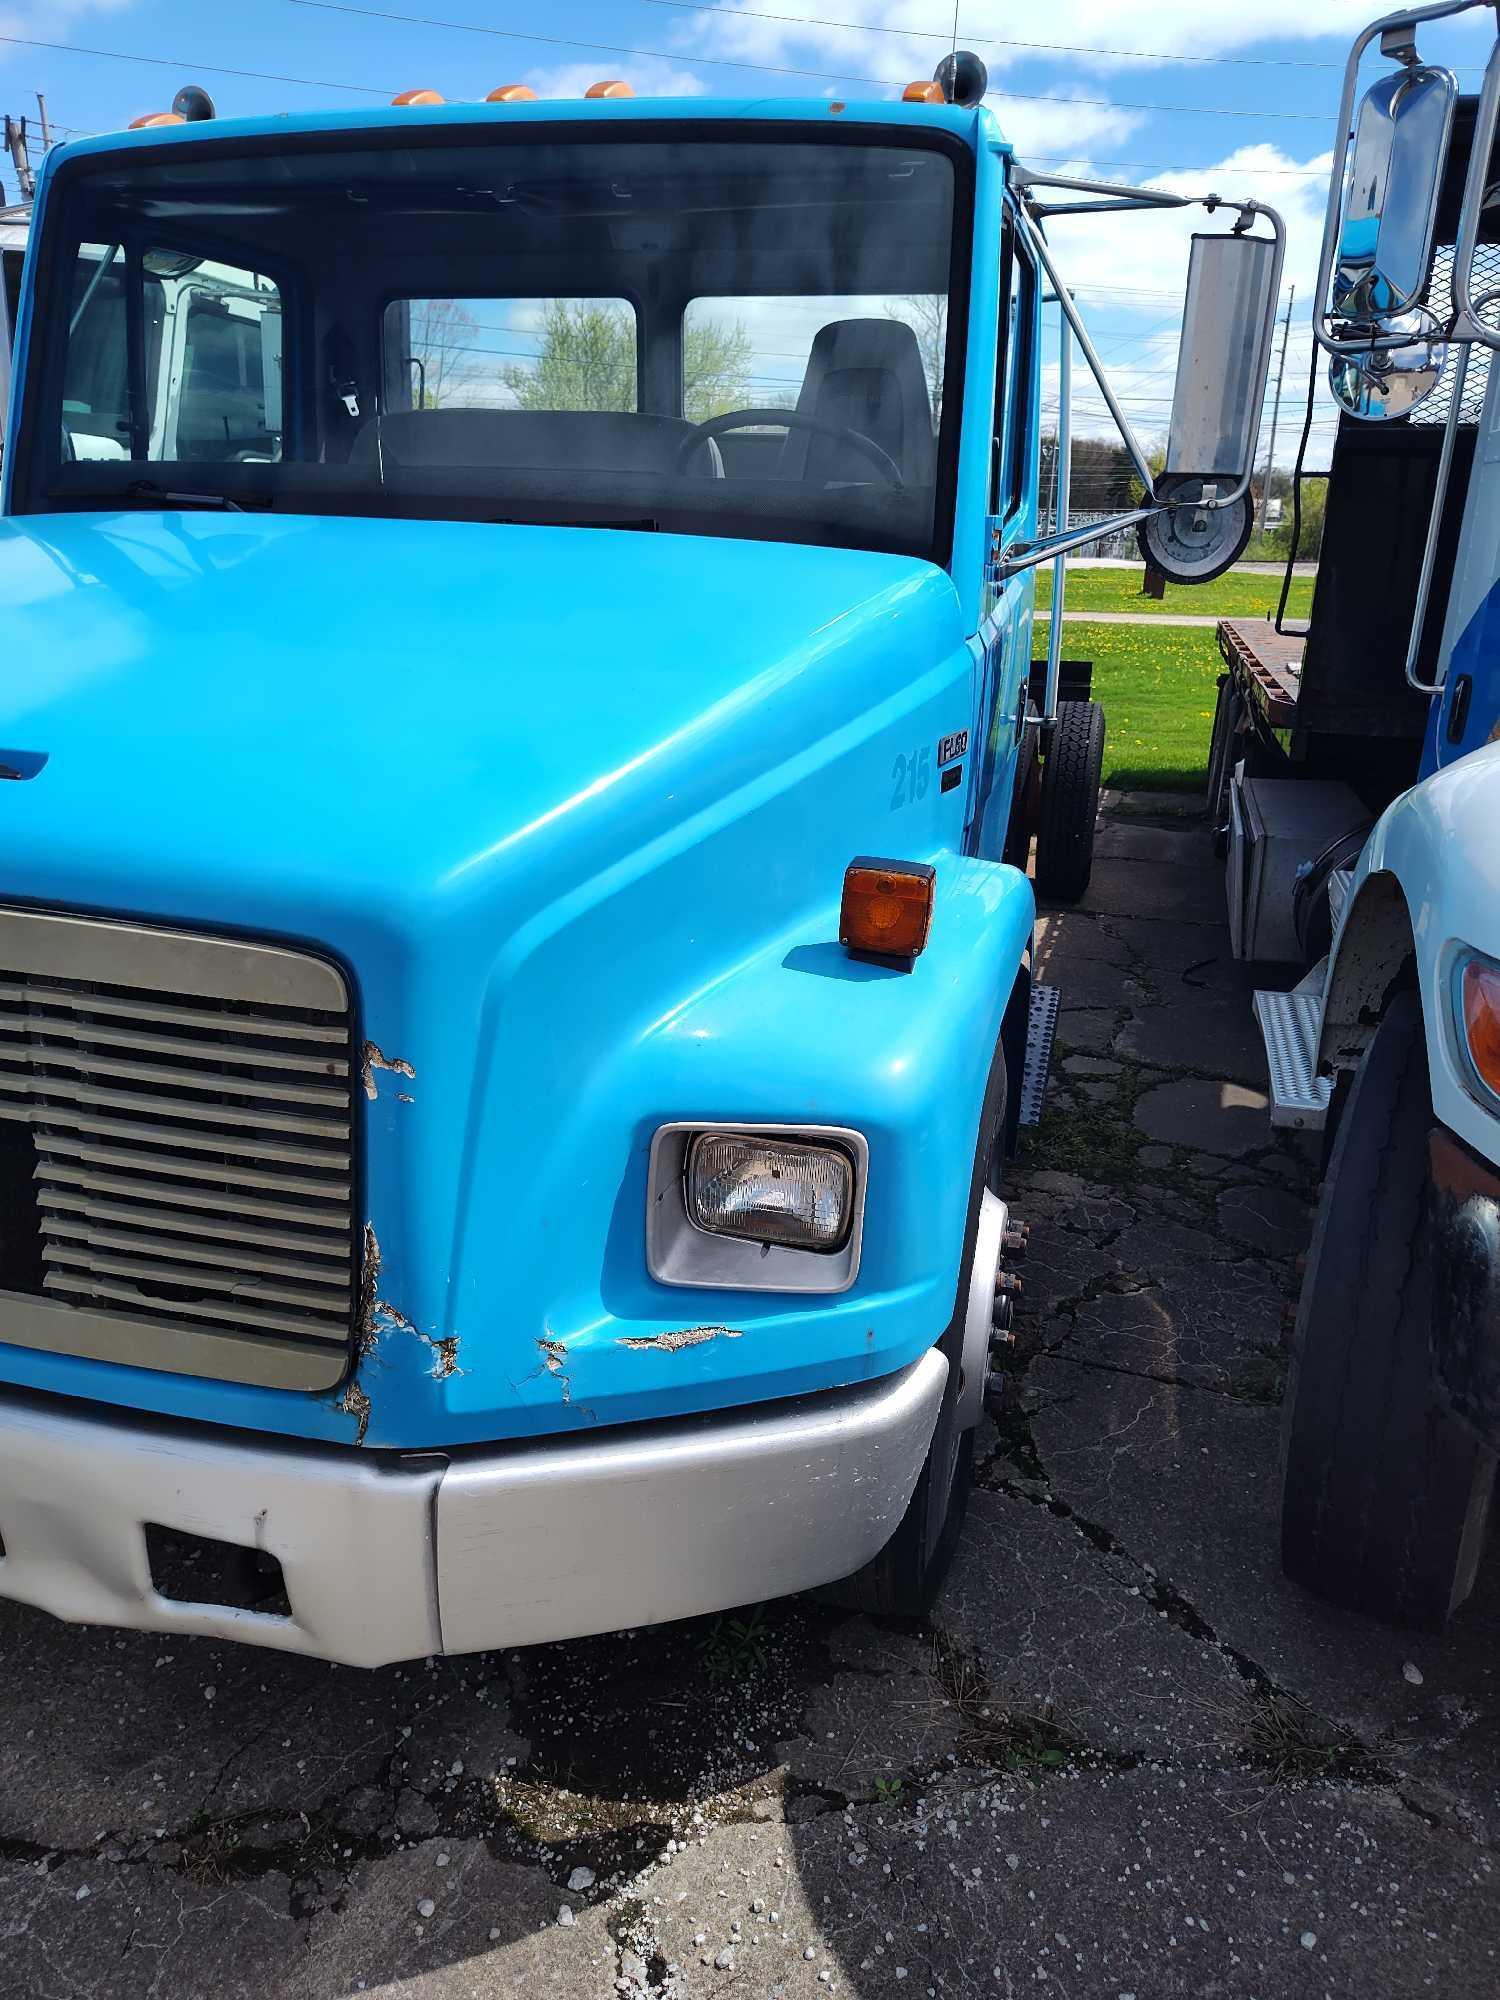 2001 Freightliner FL60 cab & chassis. 186K miles